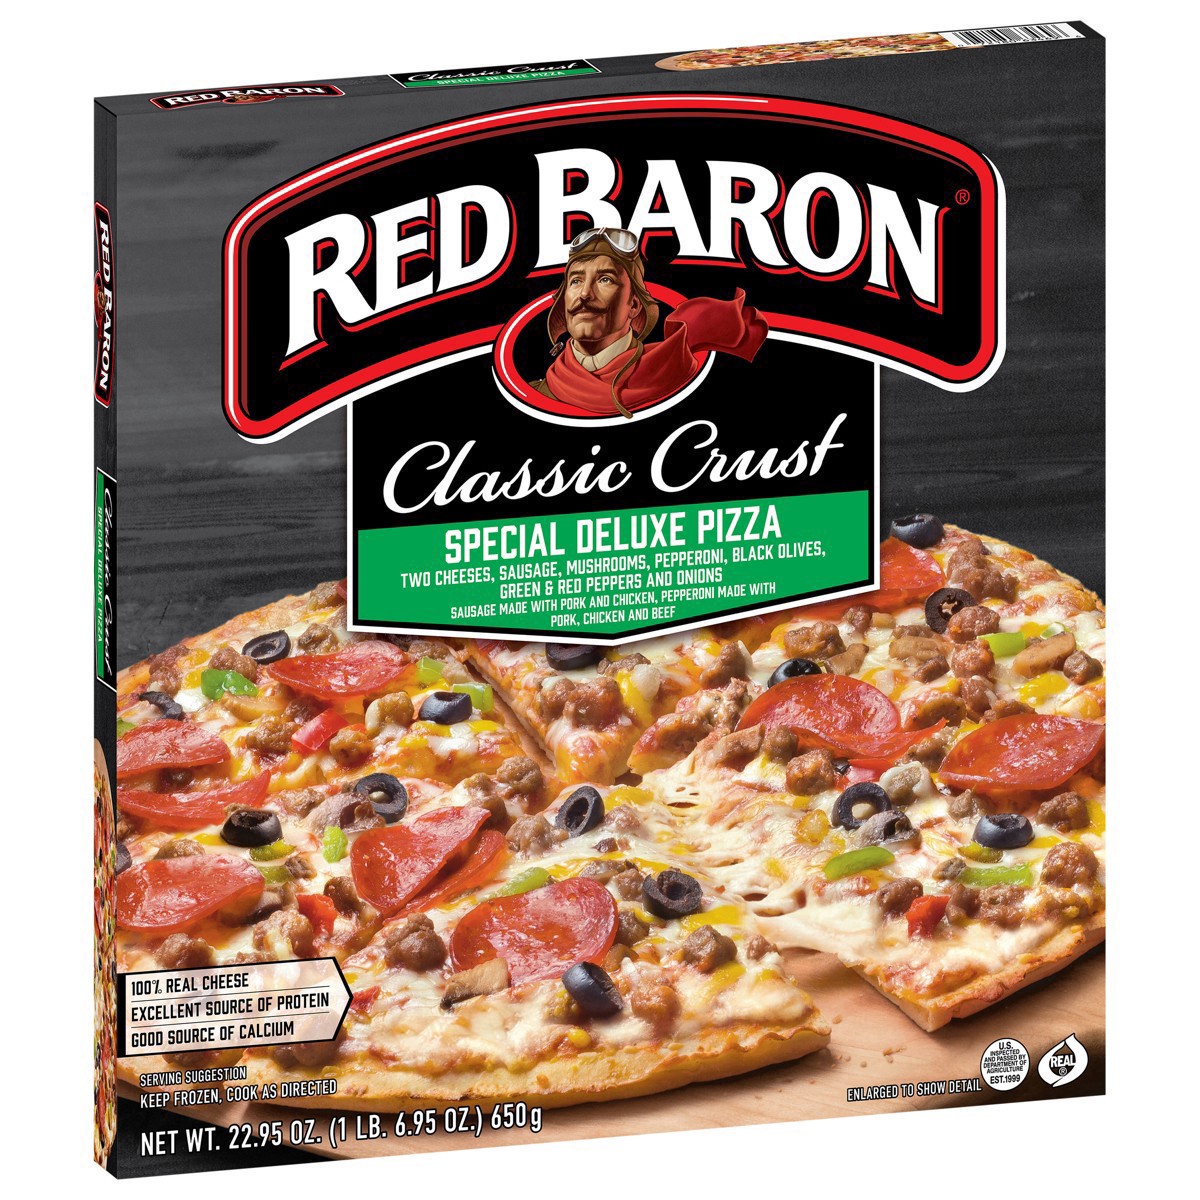 slide 9 of 89, Red Baron Frozen Pizza Classic Crust Special Deluxe, 1.43 lb